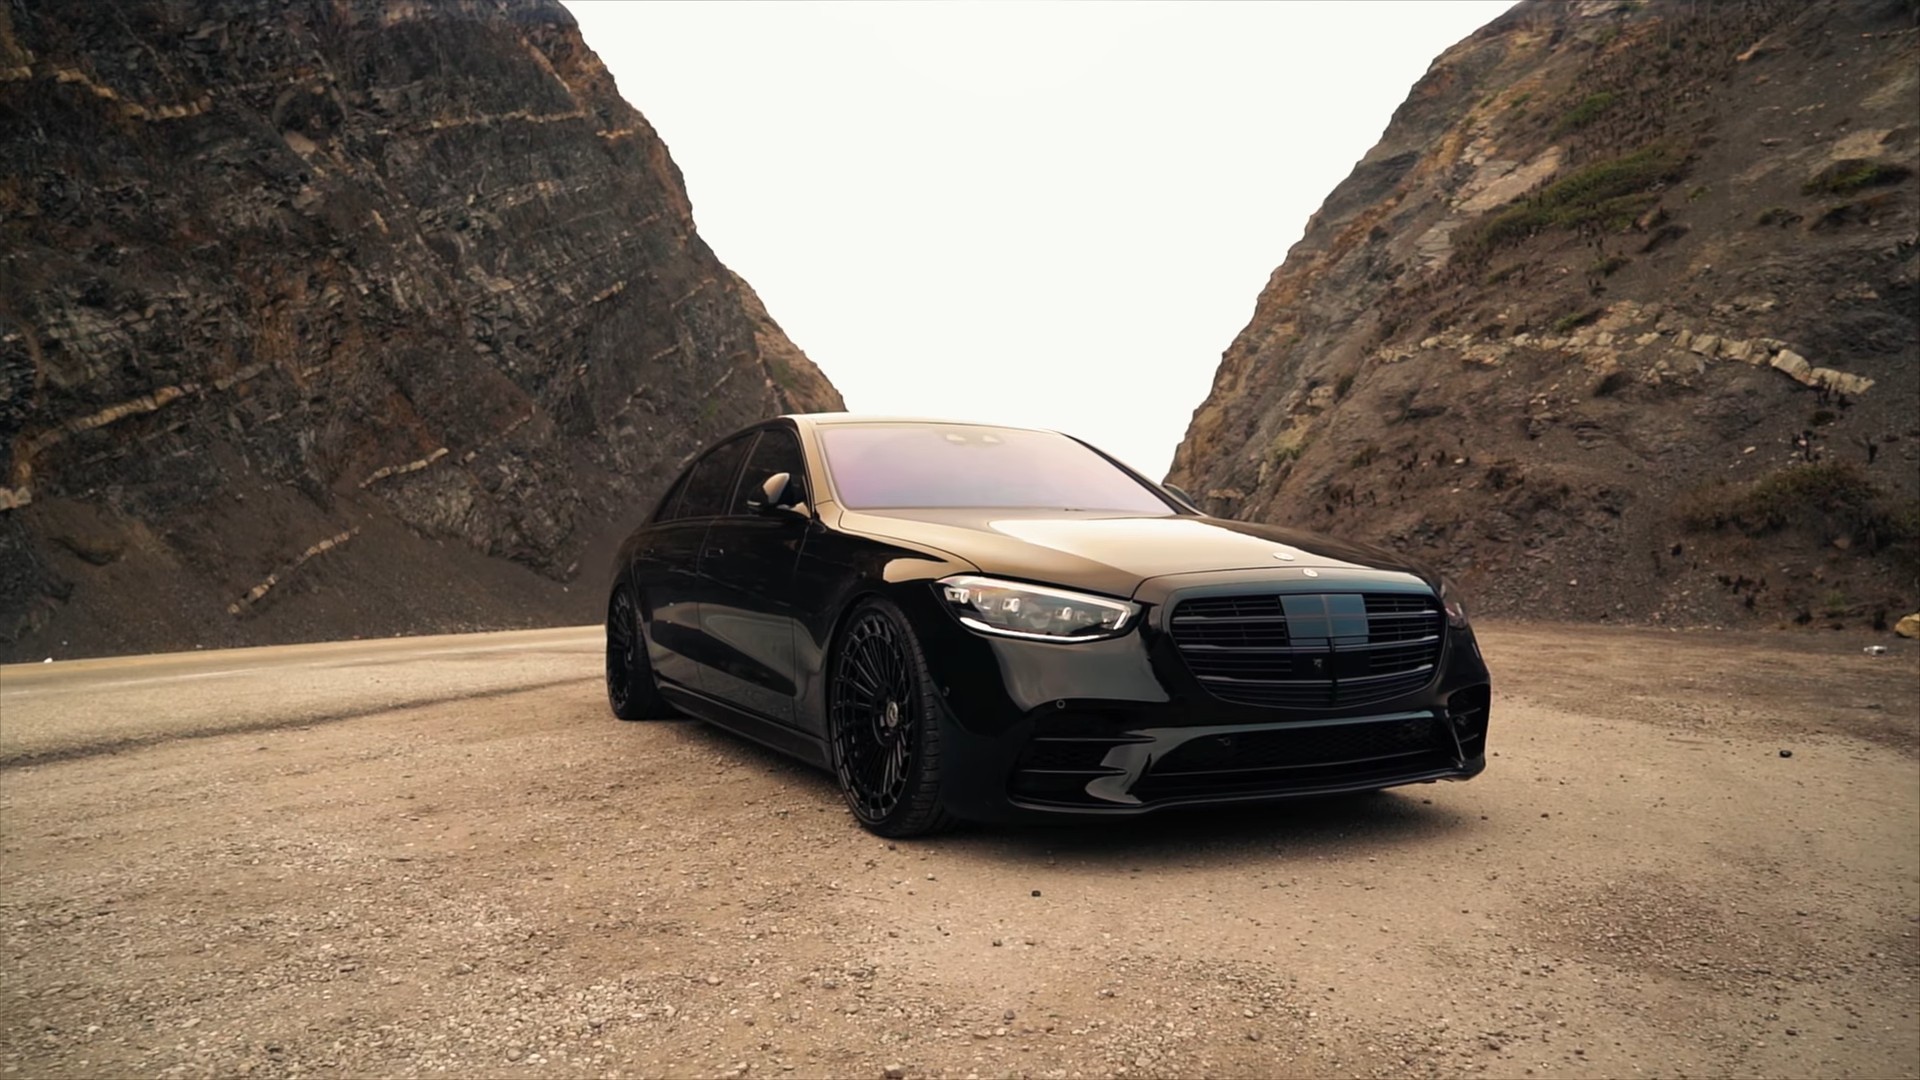 W223 Mercedes S Class Imagined As All Black Coupe Looks Smoother Than Airflow Autoevolution